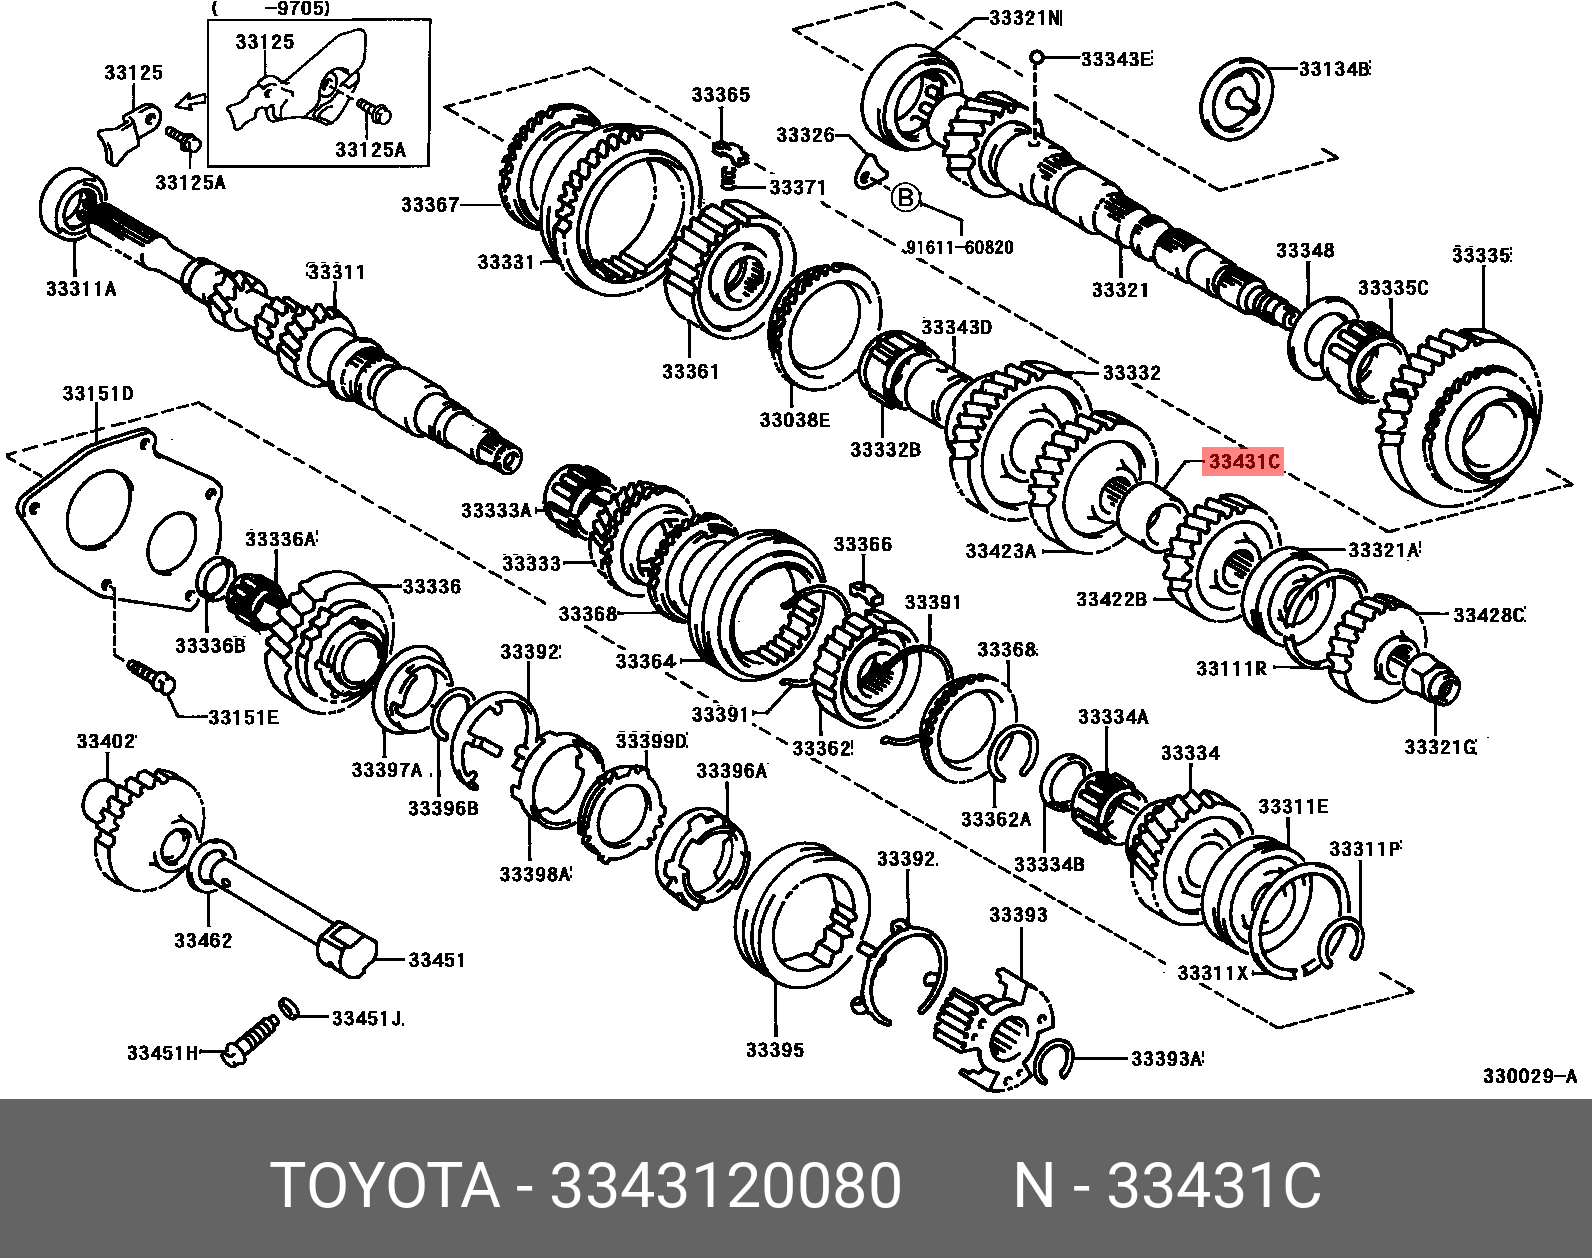 COROLLA LEVIN 198705 - 199106, SPACER, OUTPUT GEAR